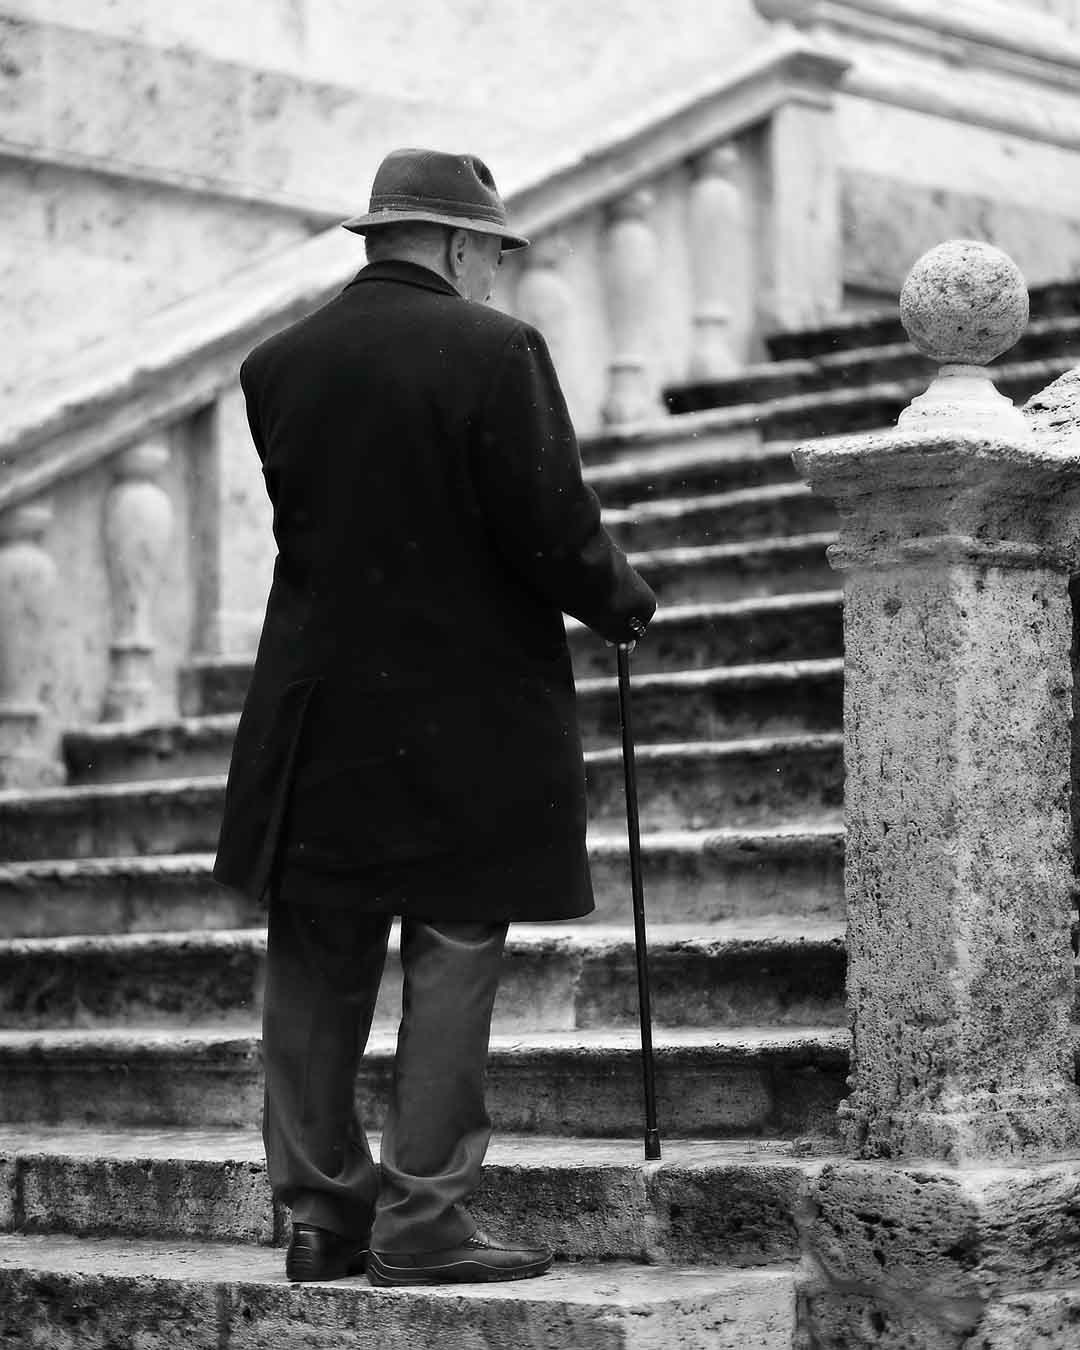 Man on stairs #1, Siena, Italy, 2008